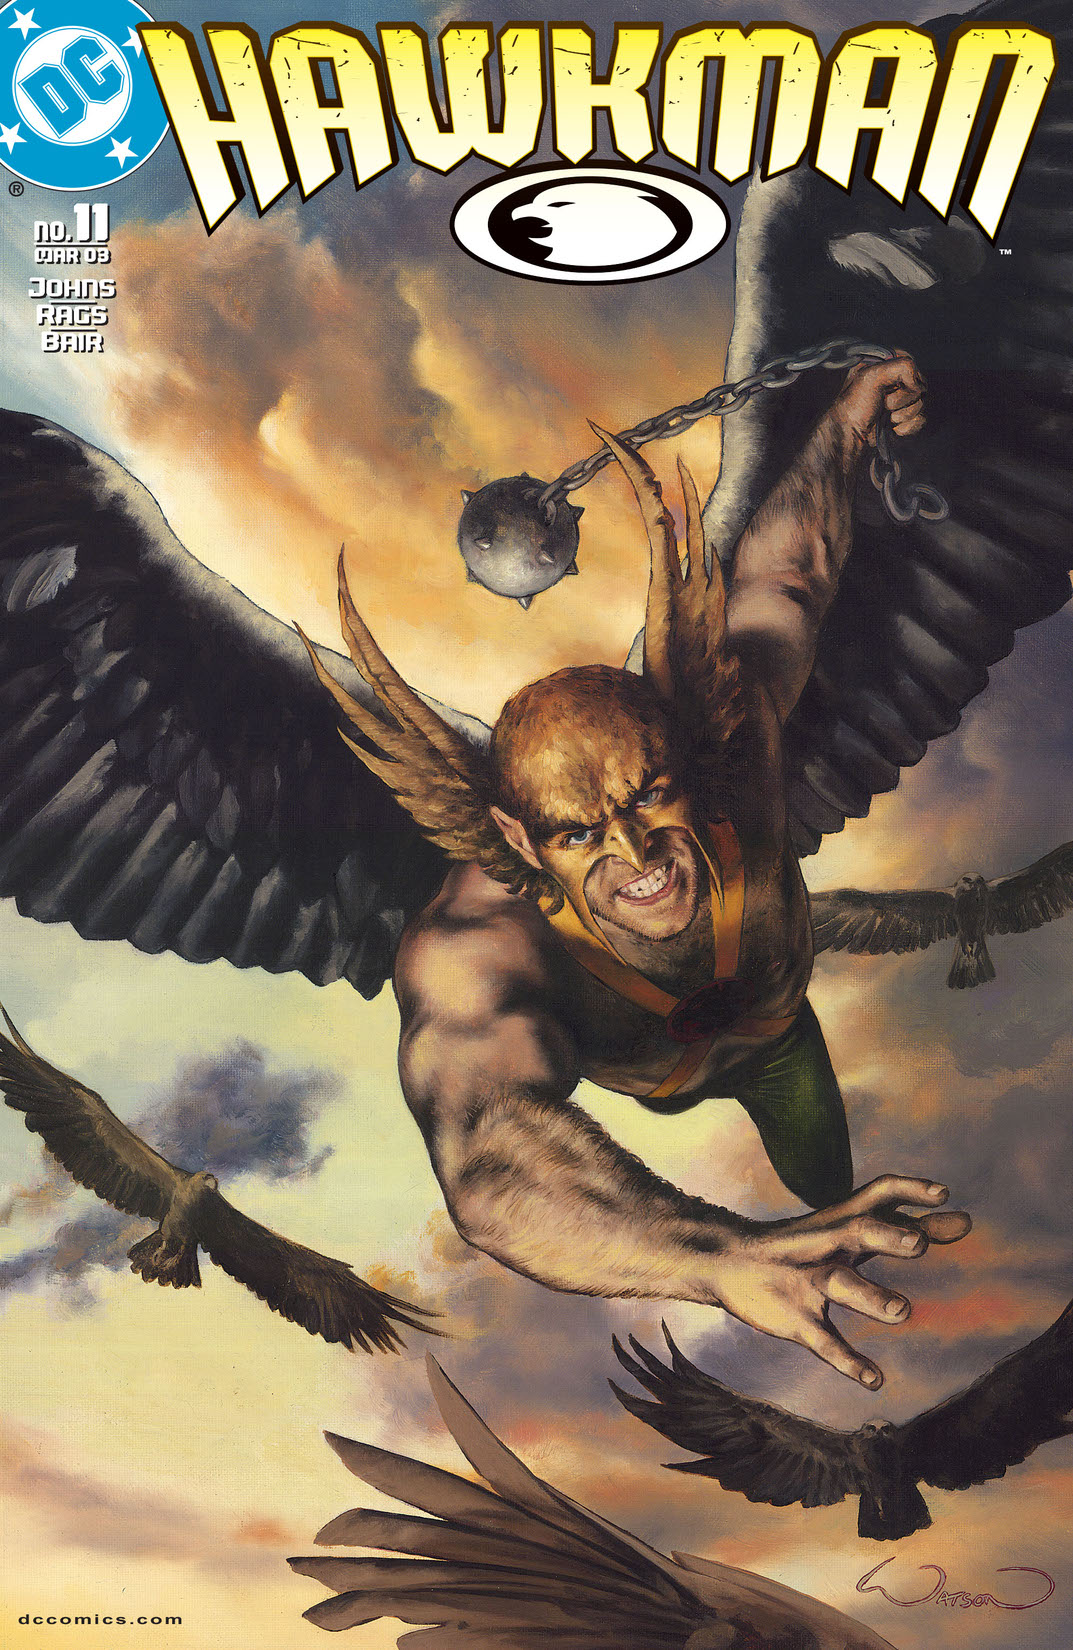 Hawkman (2002-) #11 preview images